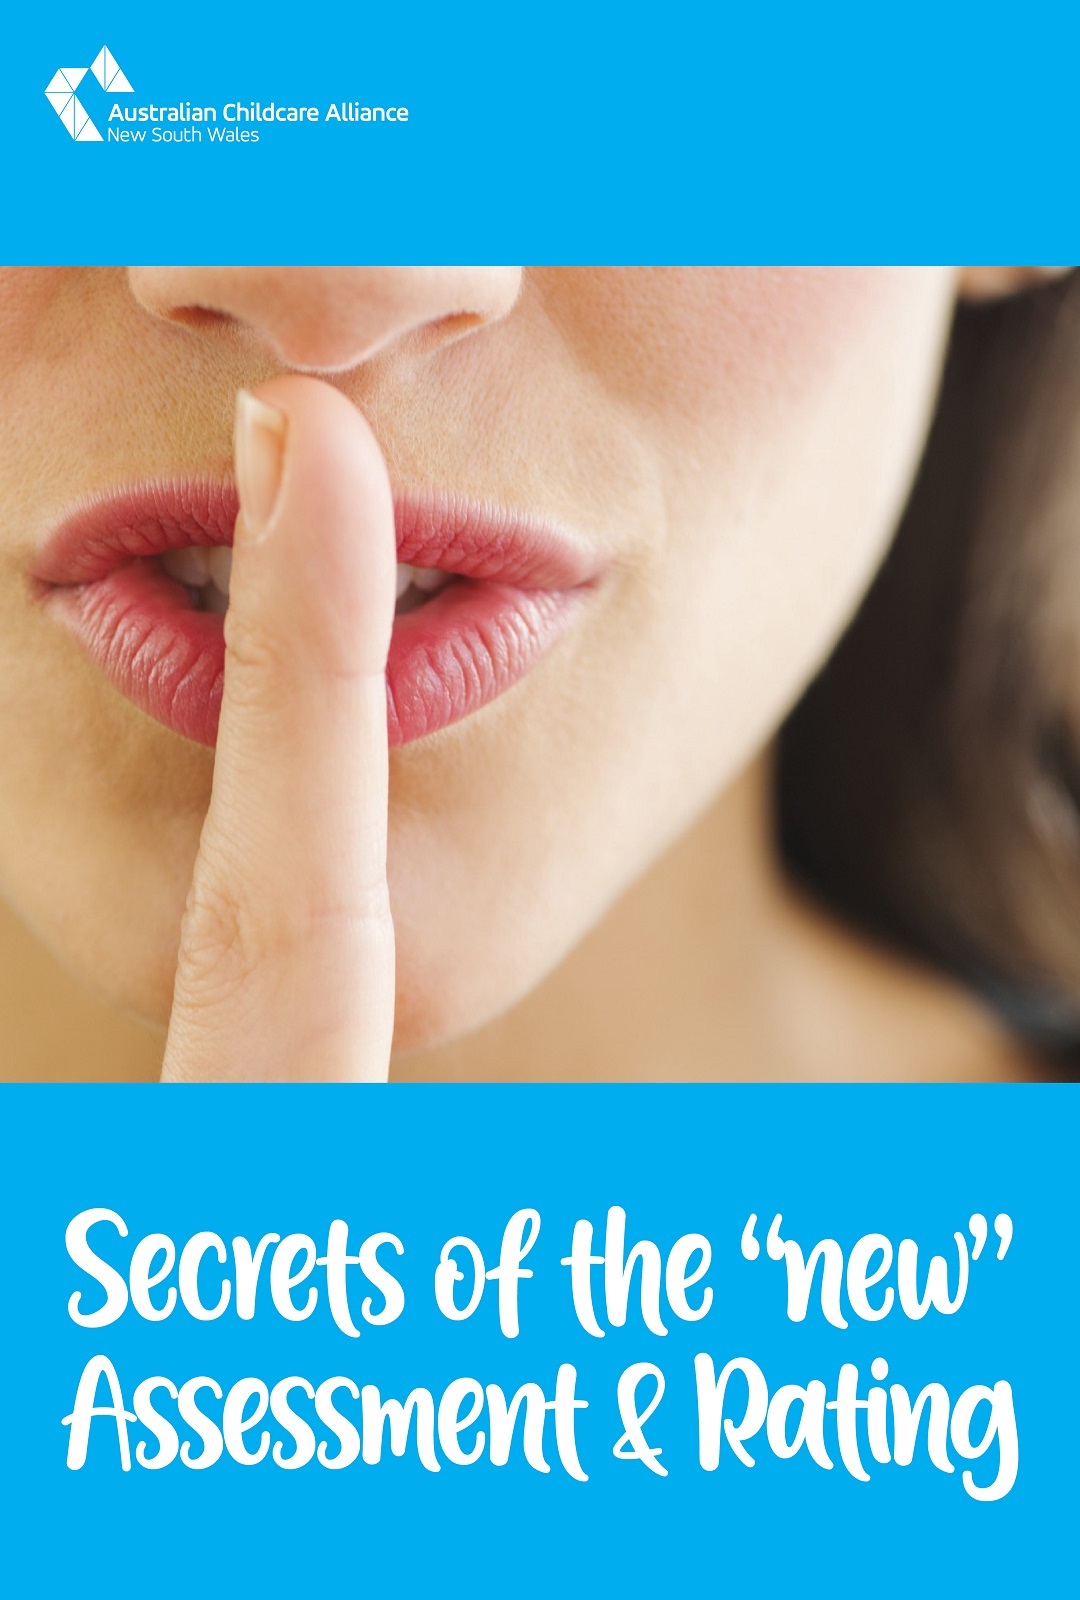 Vimeo Poster2 Secrets of the new AnR